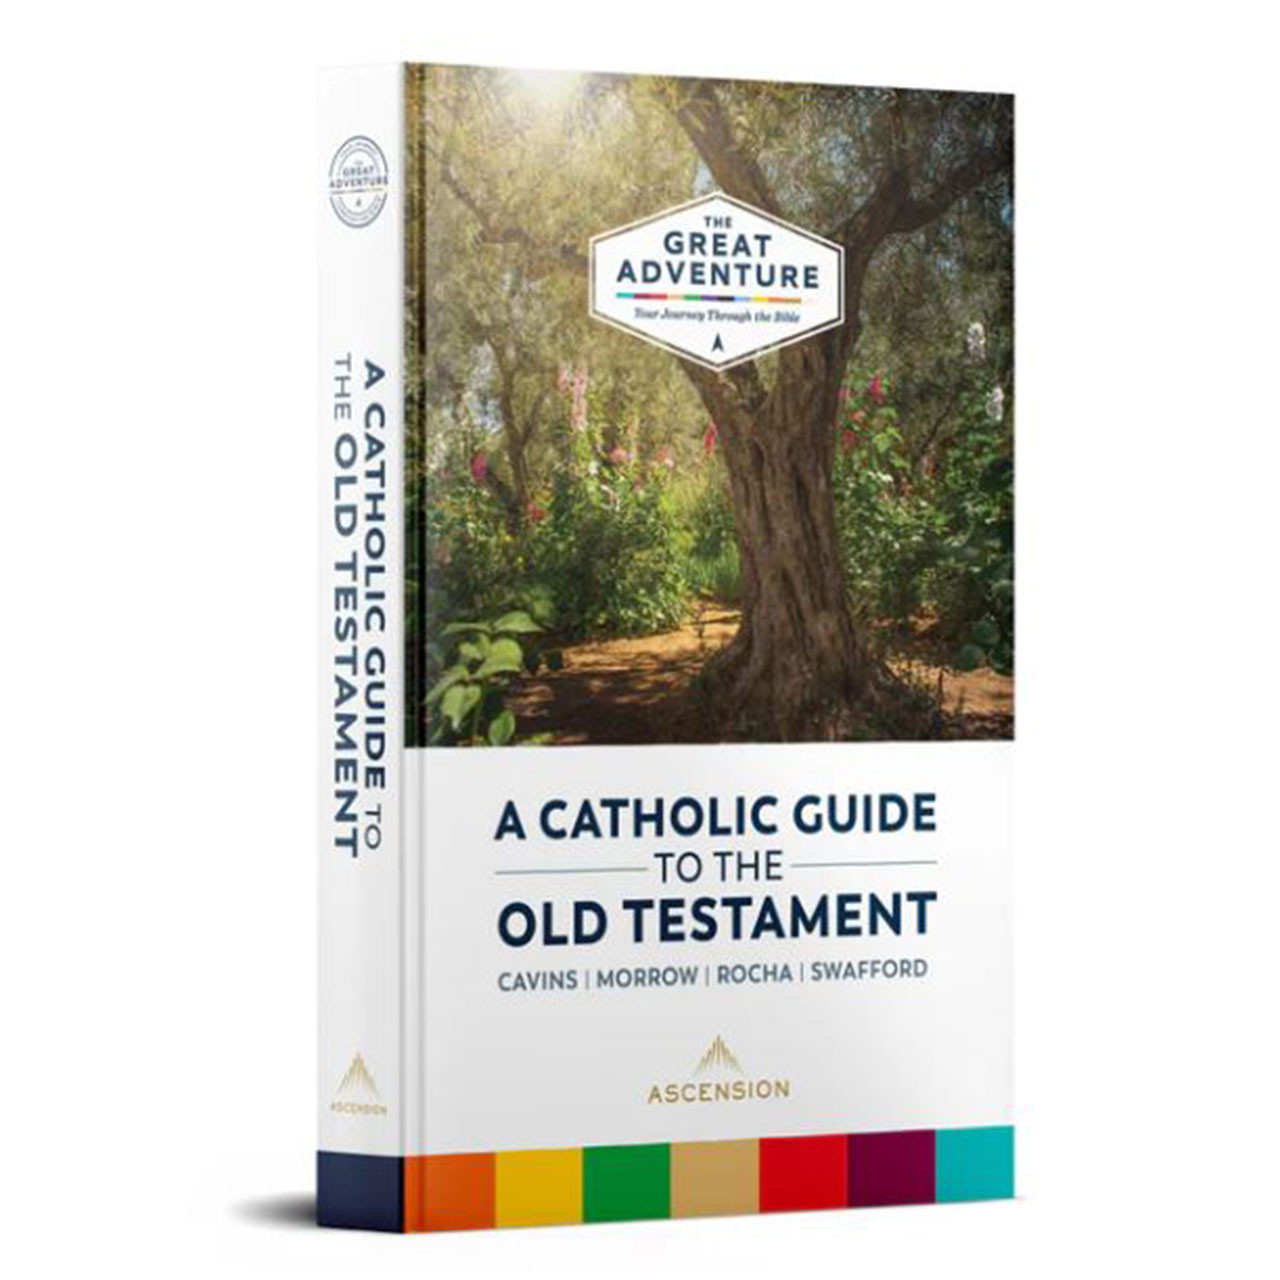 Catholic Guide to the Old Testament by Jeff Cavins and other authors